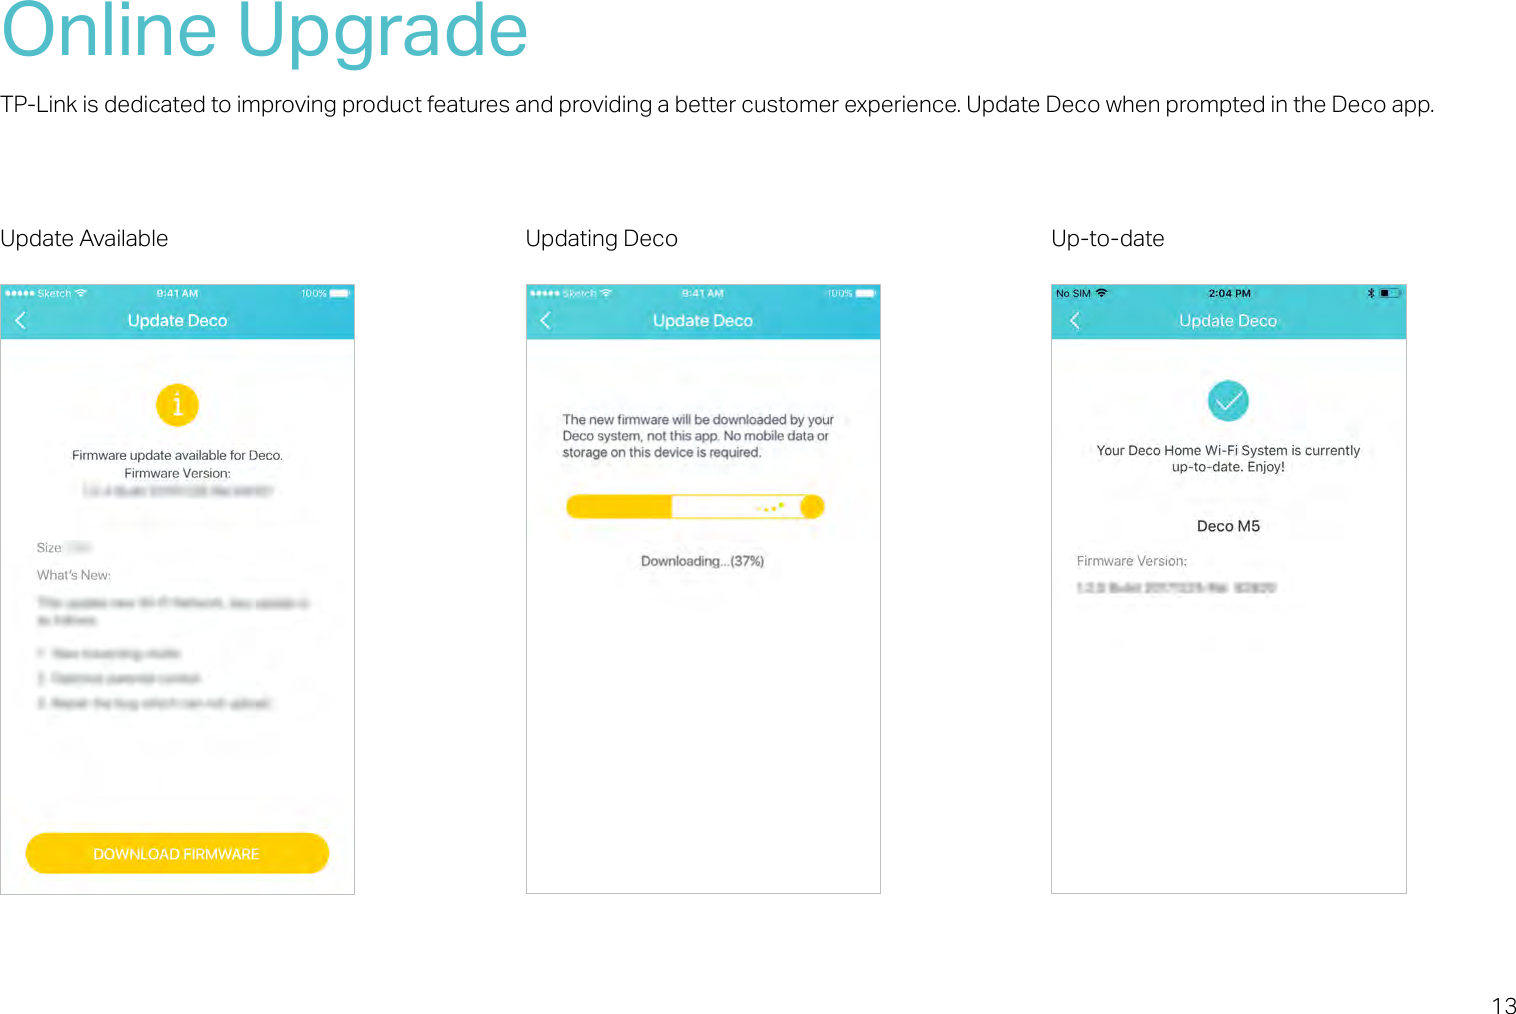 13Online UpgradeTP-Link is dedicated to improving product features and providing a better customer experience. Update Deco when prompted in the Deco app.Update Available Updating Deco Up-to-date